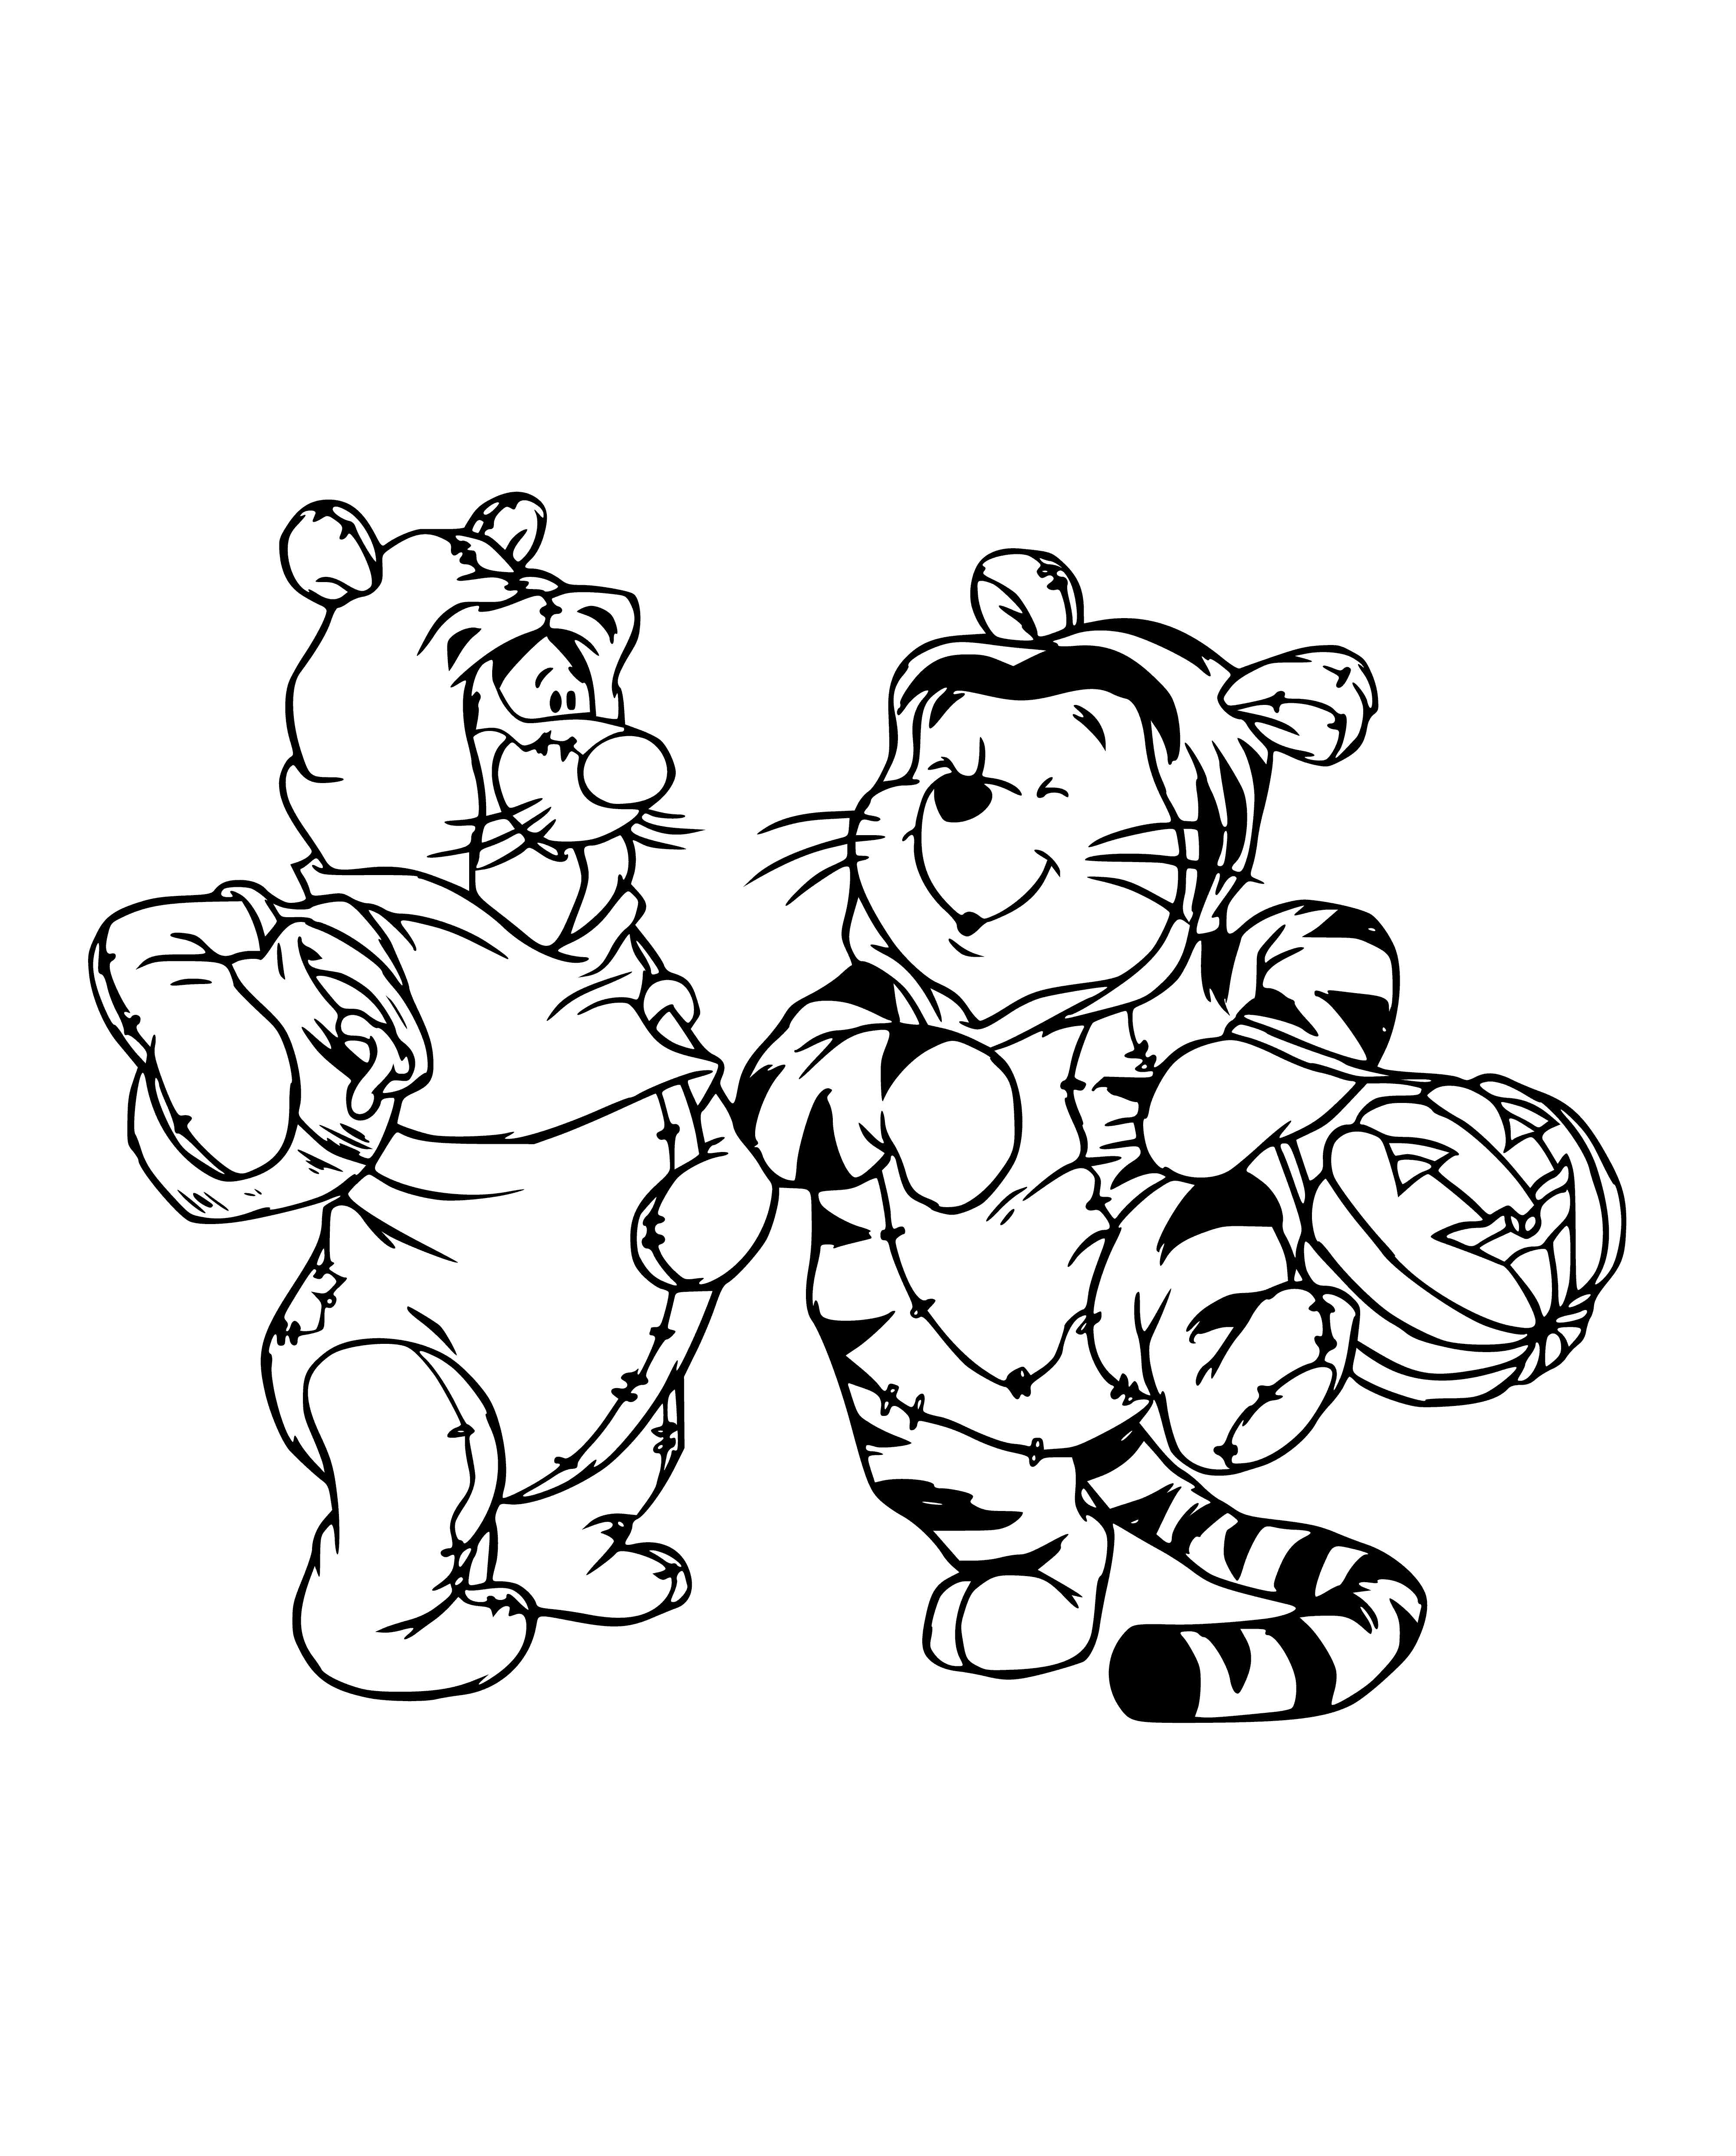 coloring page: Winnie the Pooh and friends dress up: Pooh a mask & sword, Tigger a cape & stick, Eeyore a mask & sign "BOO", Piglet a mask & basket of flowers; bees around the flowers.